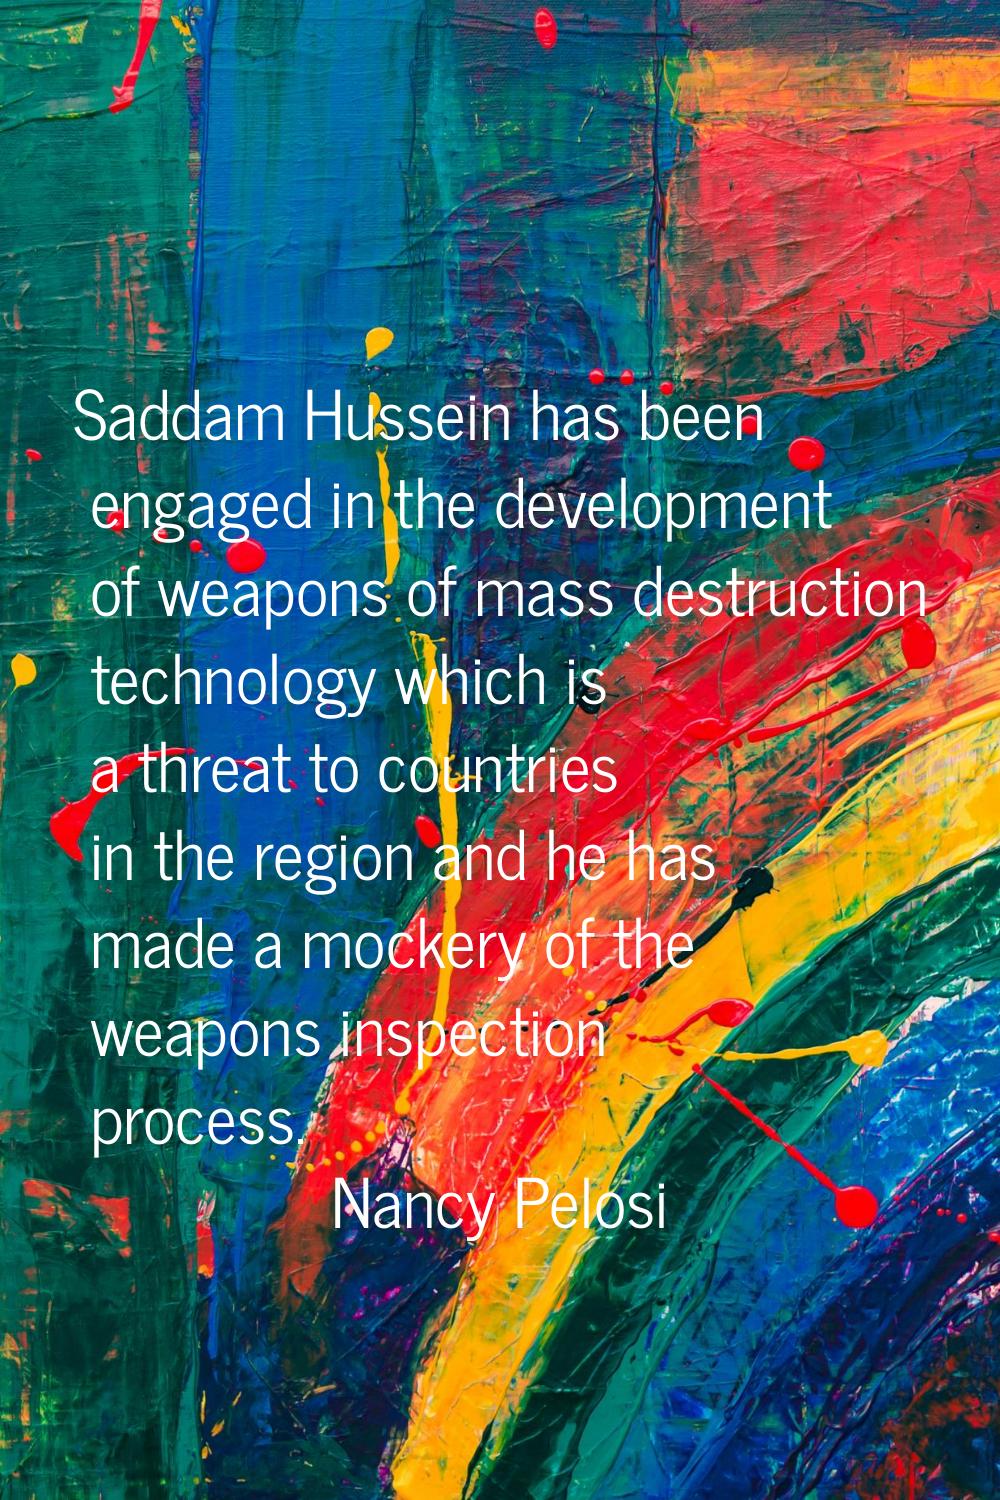 Saddam Hussein has been engaged in the development of weapons of mass destruction technology which 